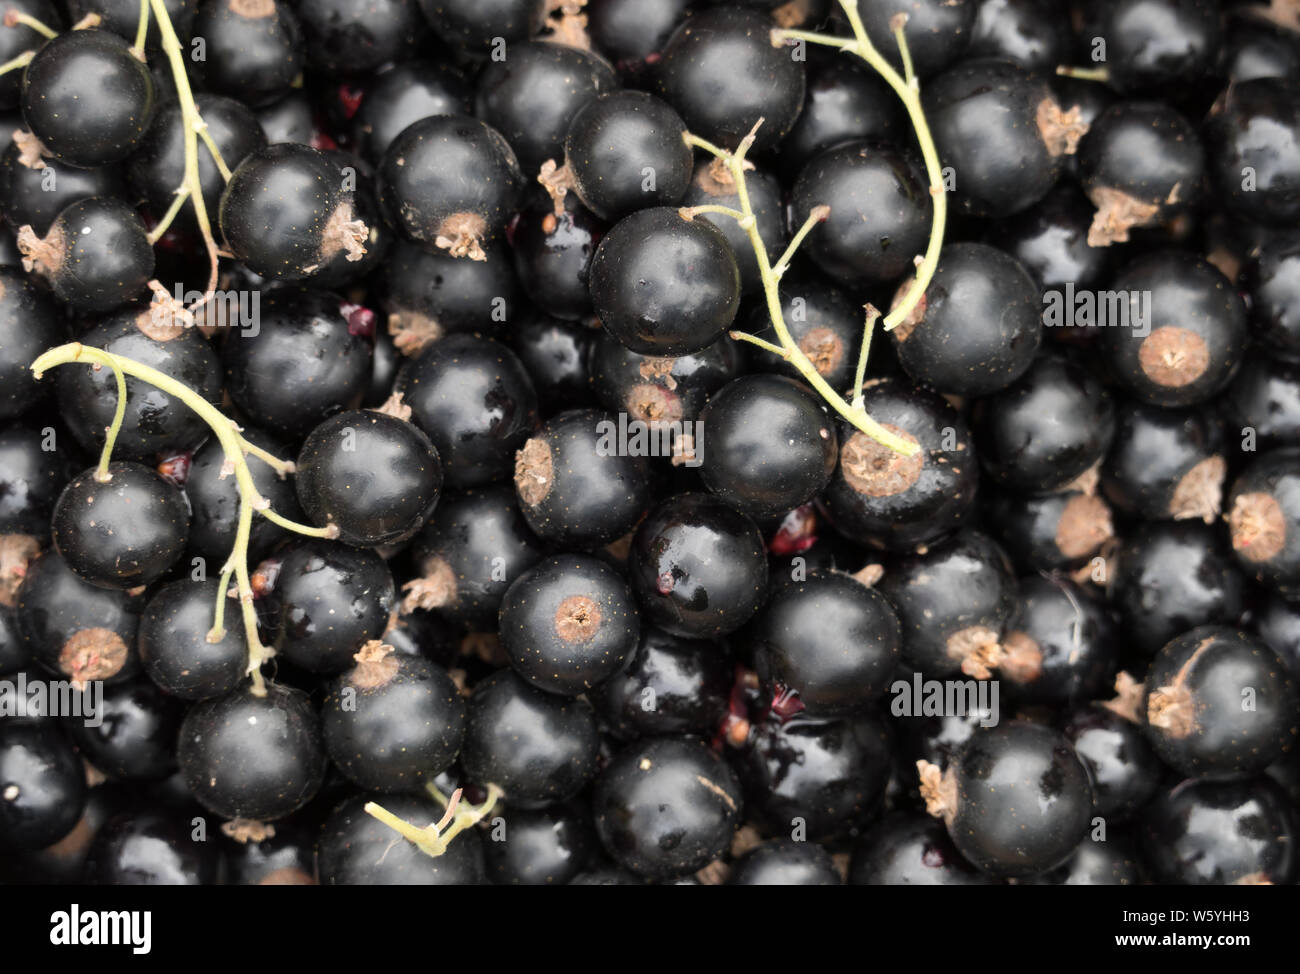 Freshly picked organic blackcurrants closeup background, top view Stock Photo